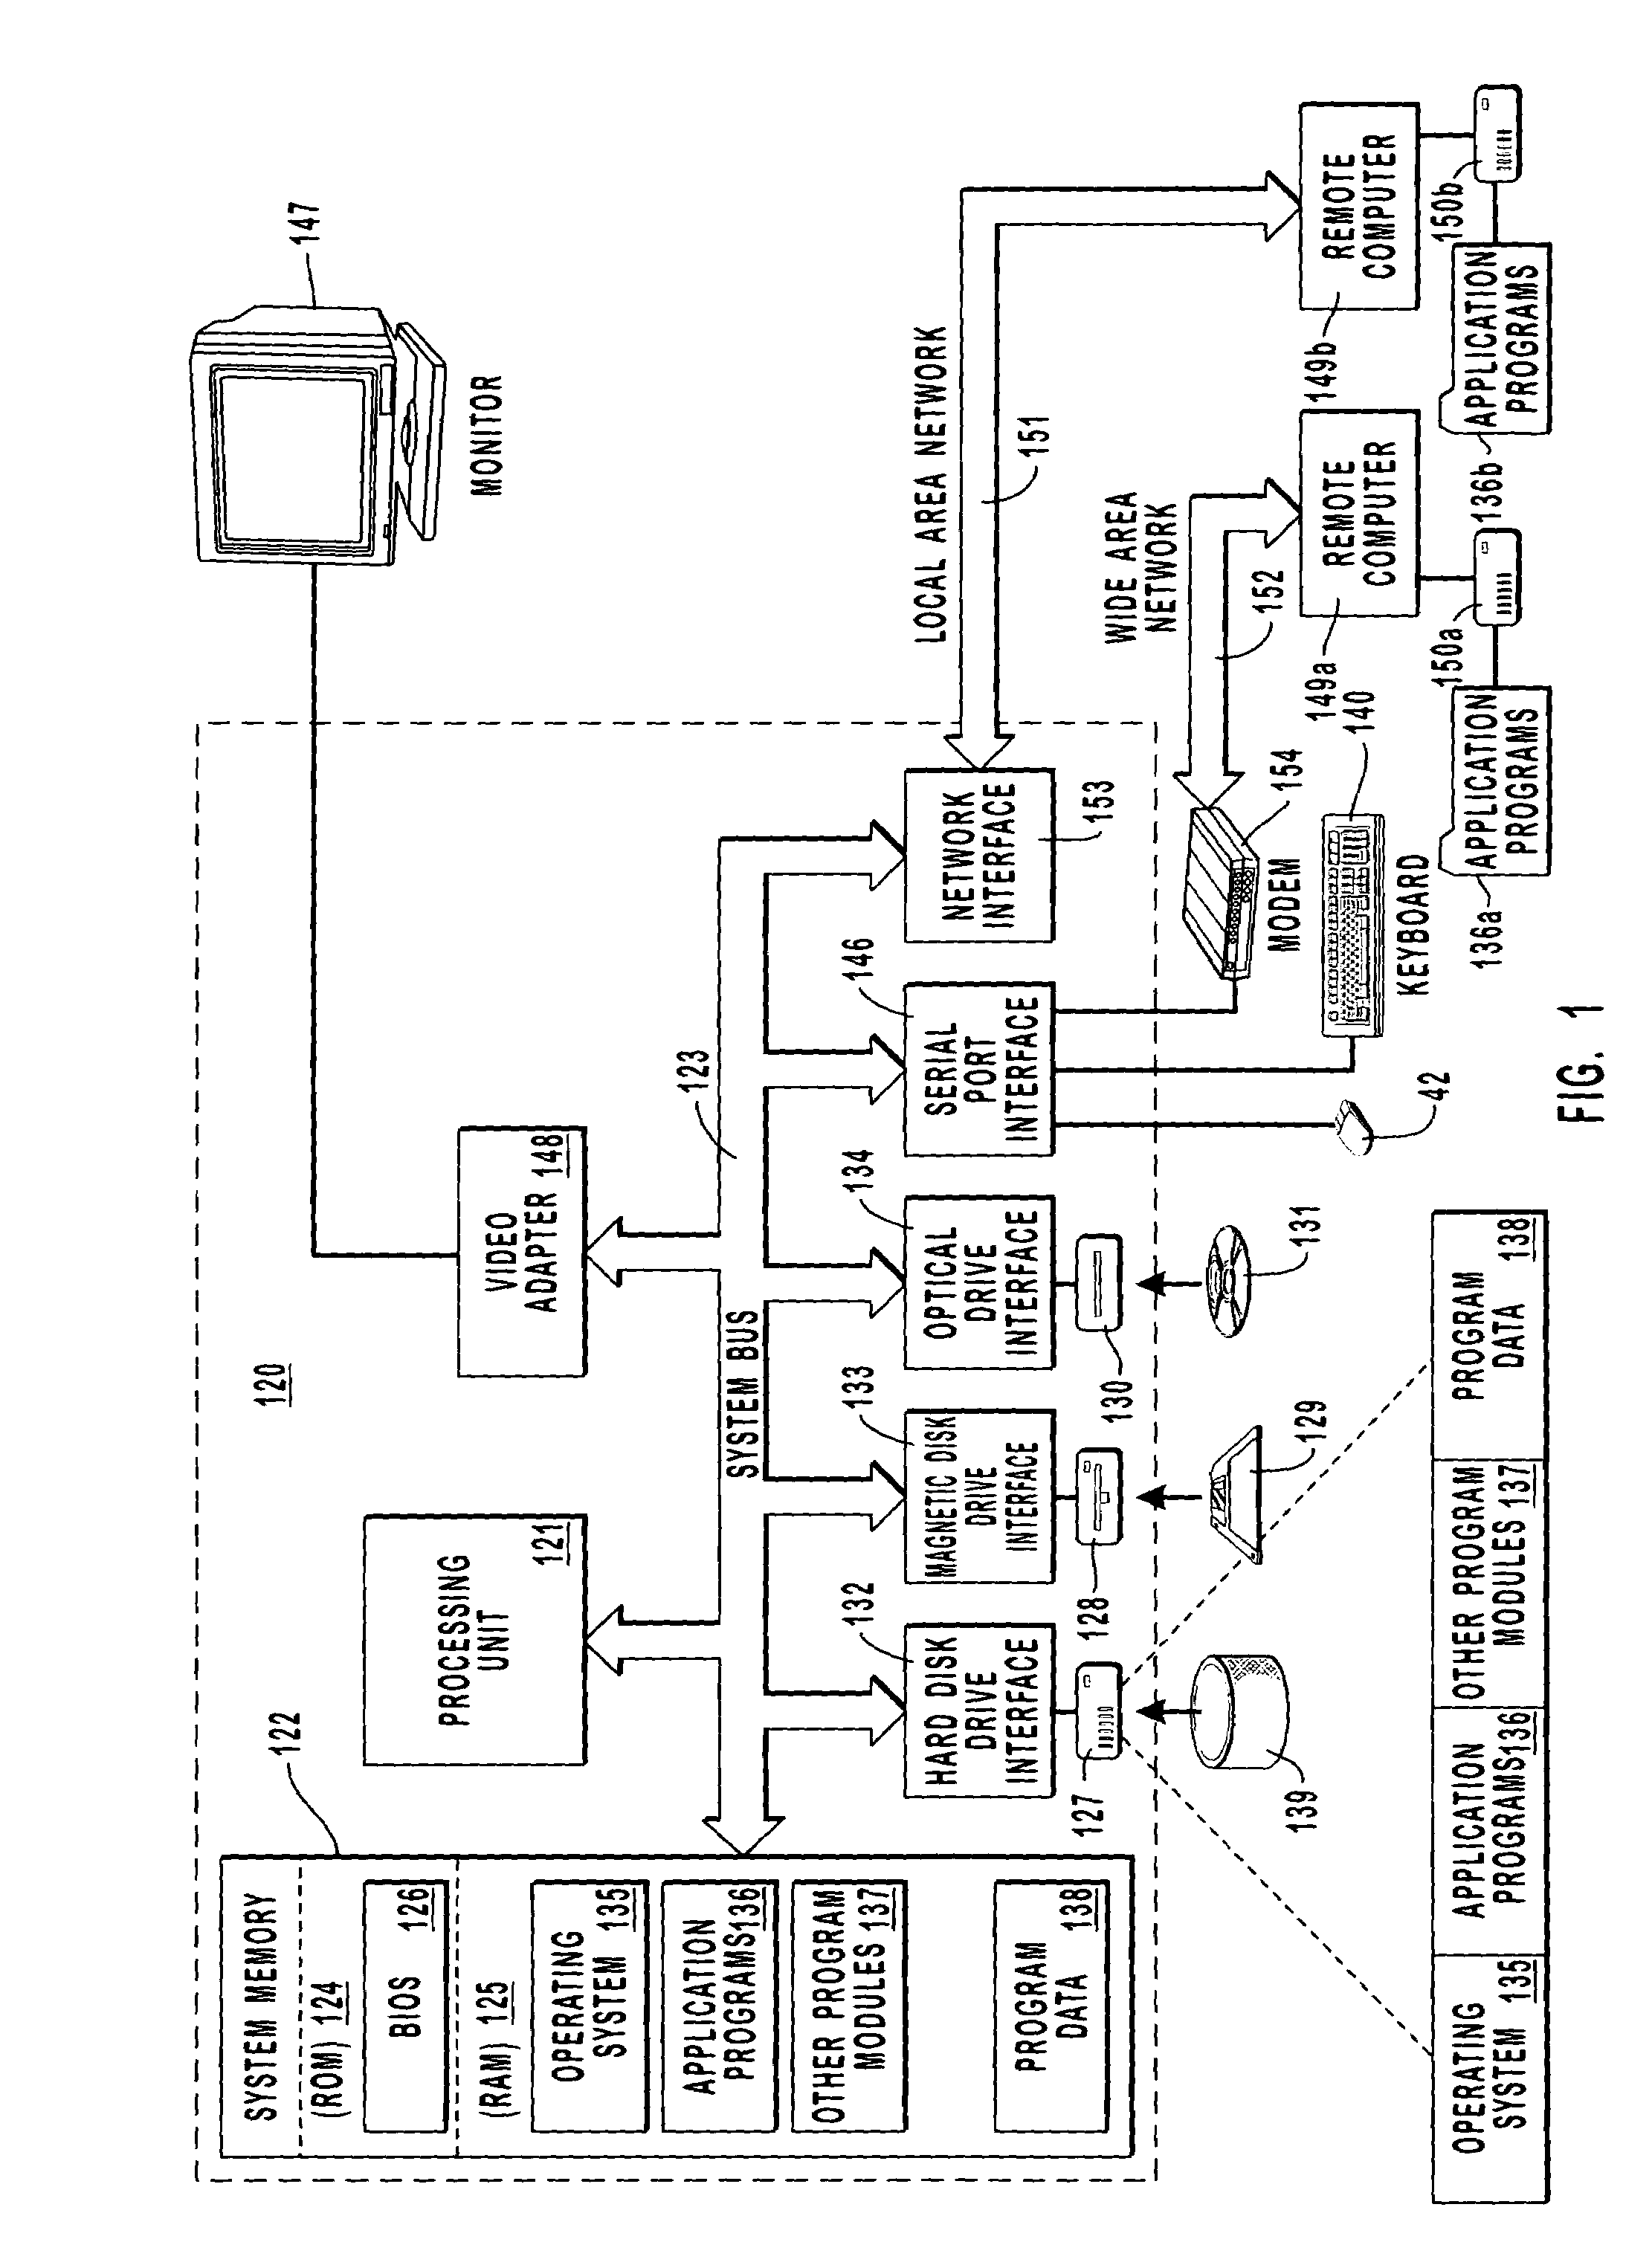 Methods and systems for selecting methodology for authenticating computer systems on a per computer system or per user basis